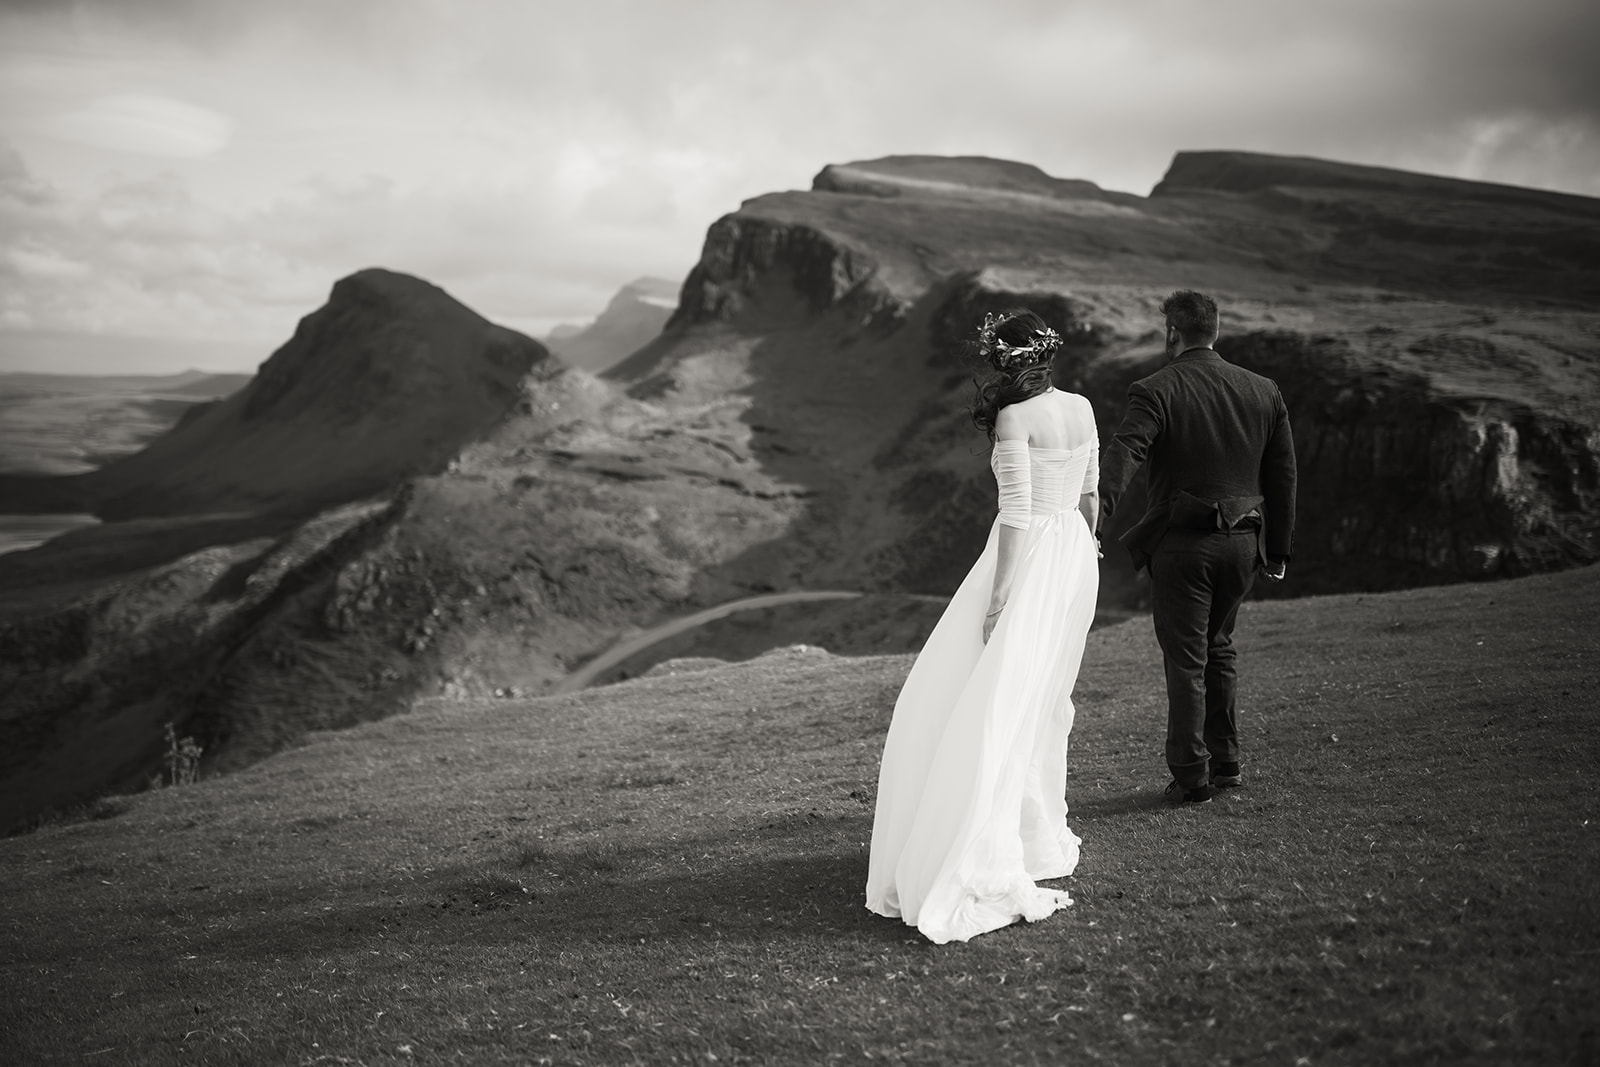 Nick and Becca, hand in hand, traverse the mystical landscape of Quiraing, capturing the essence of their elopement day